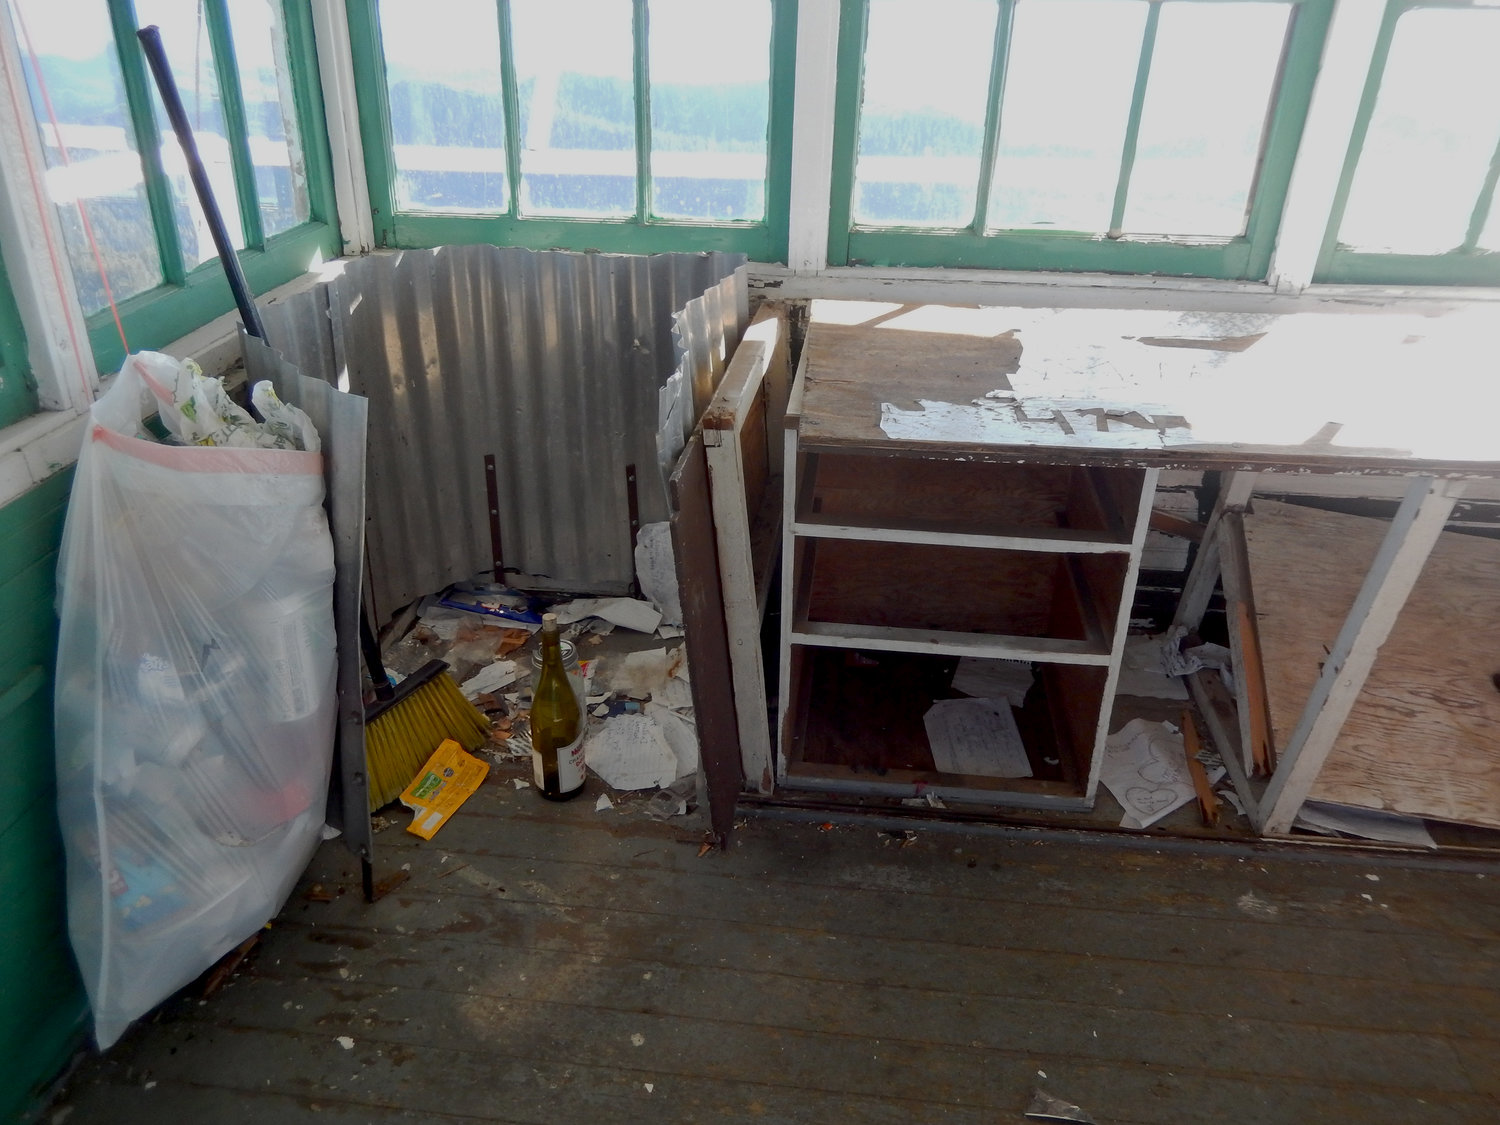 Garbage litters the inside of the historic High Rock Lookout. Photo courtesy of Mary Prophit.